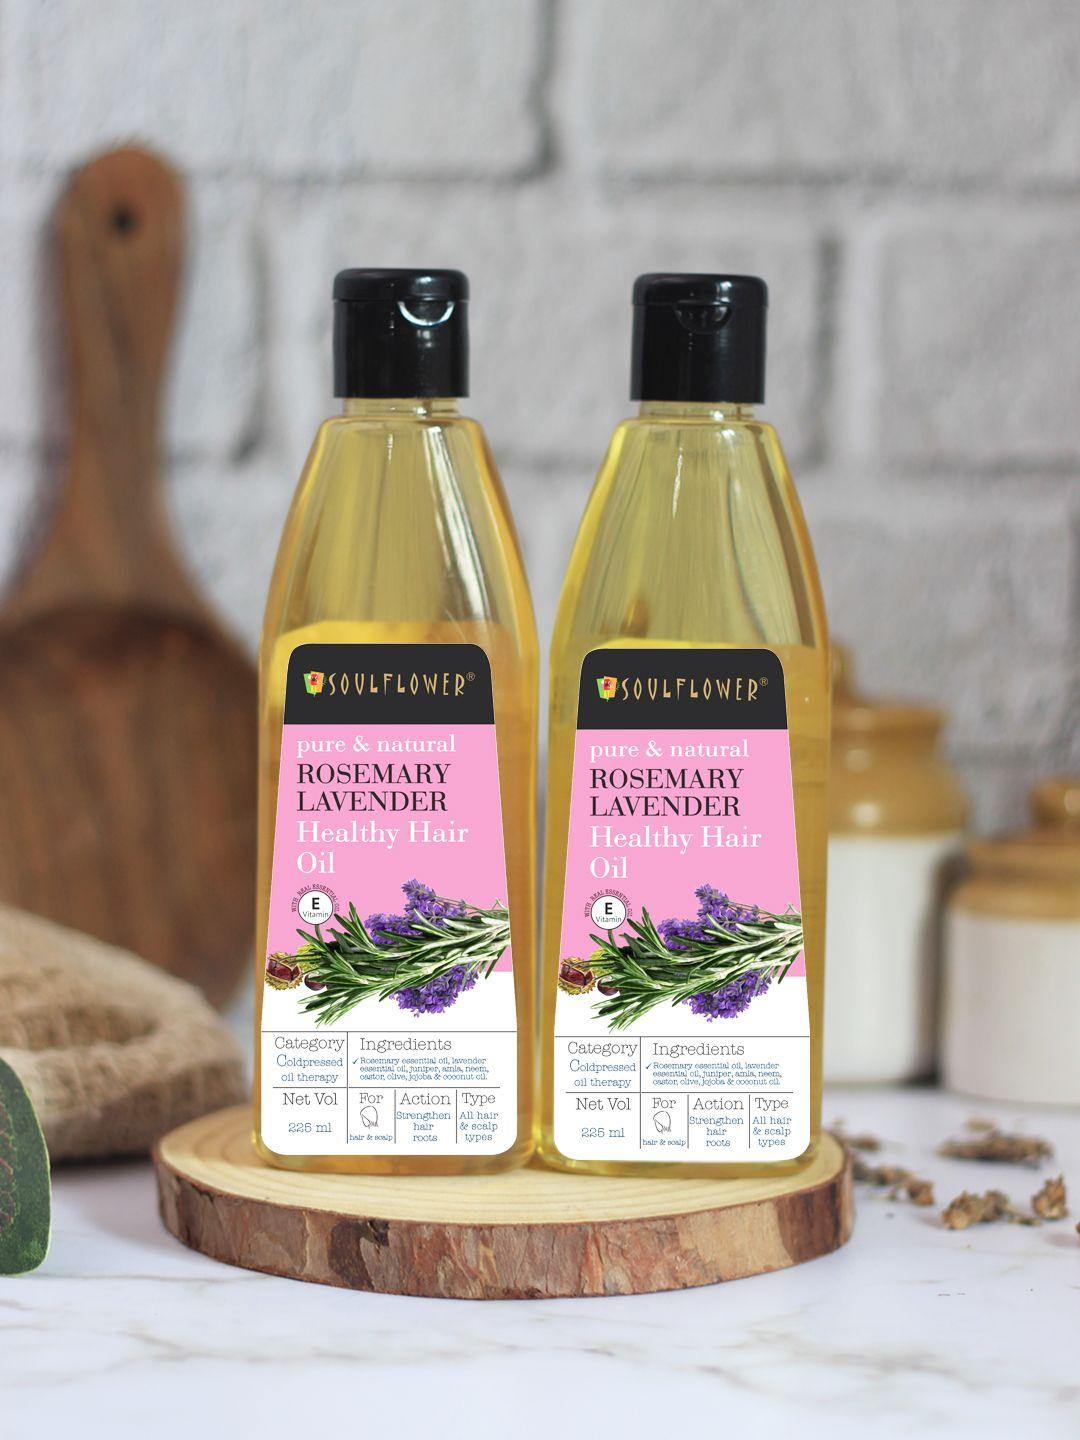 soulflower set of 2 100% pure rosemary lavender healthy hair oil - 225 ml each